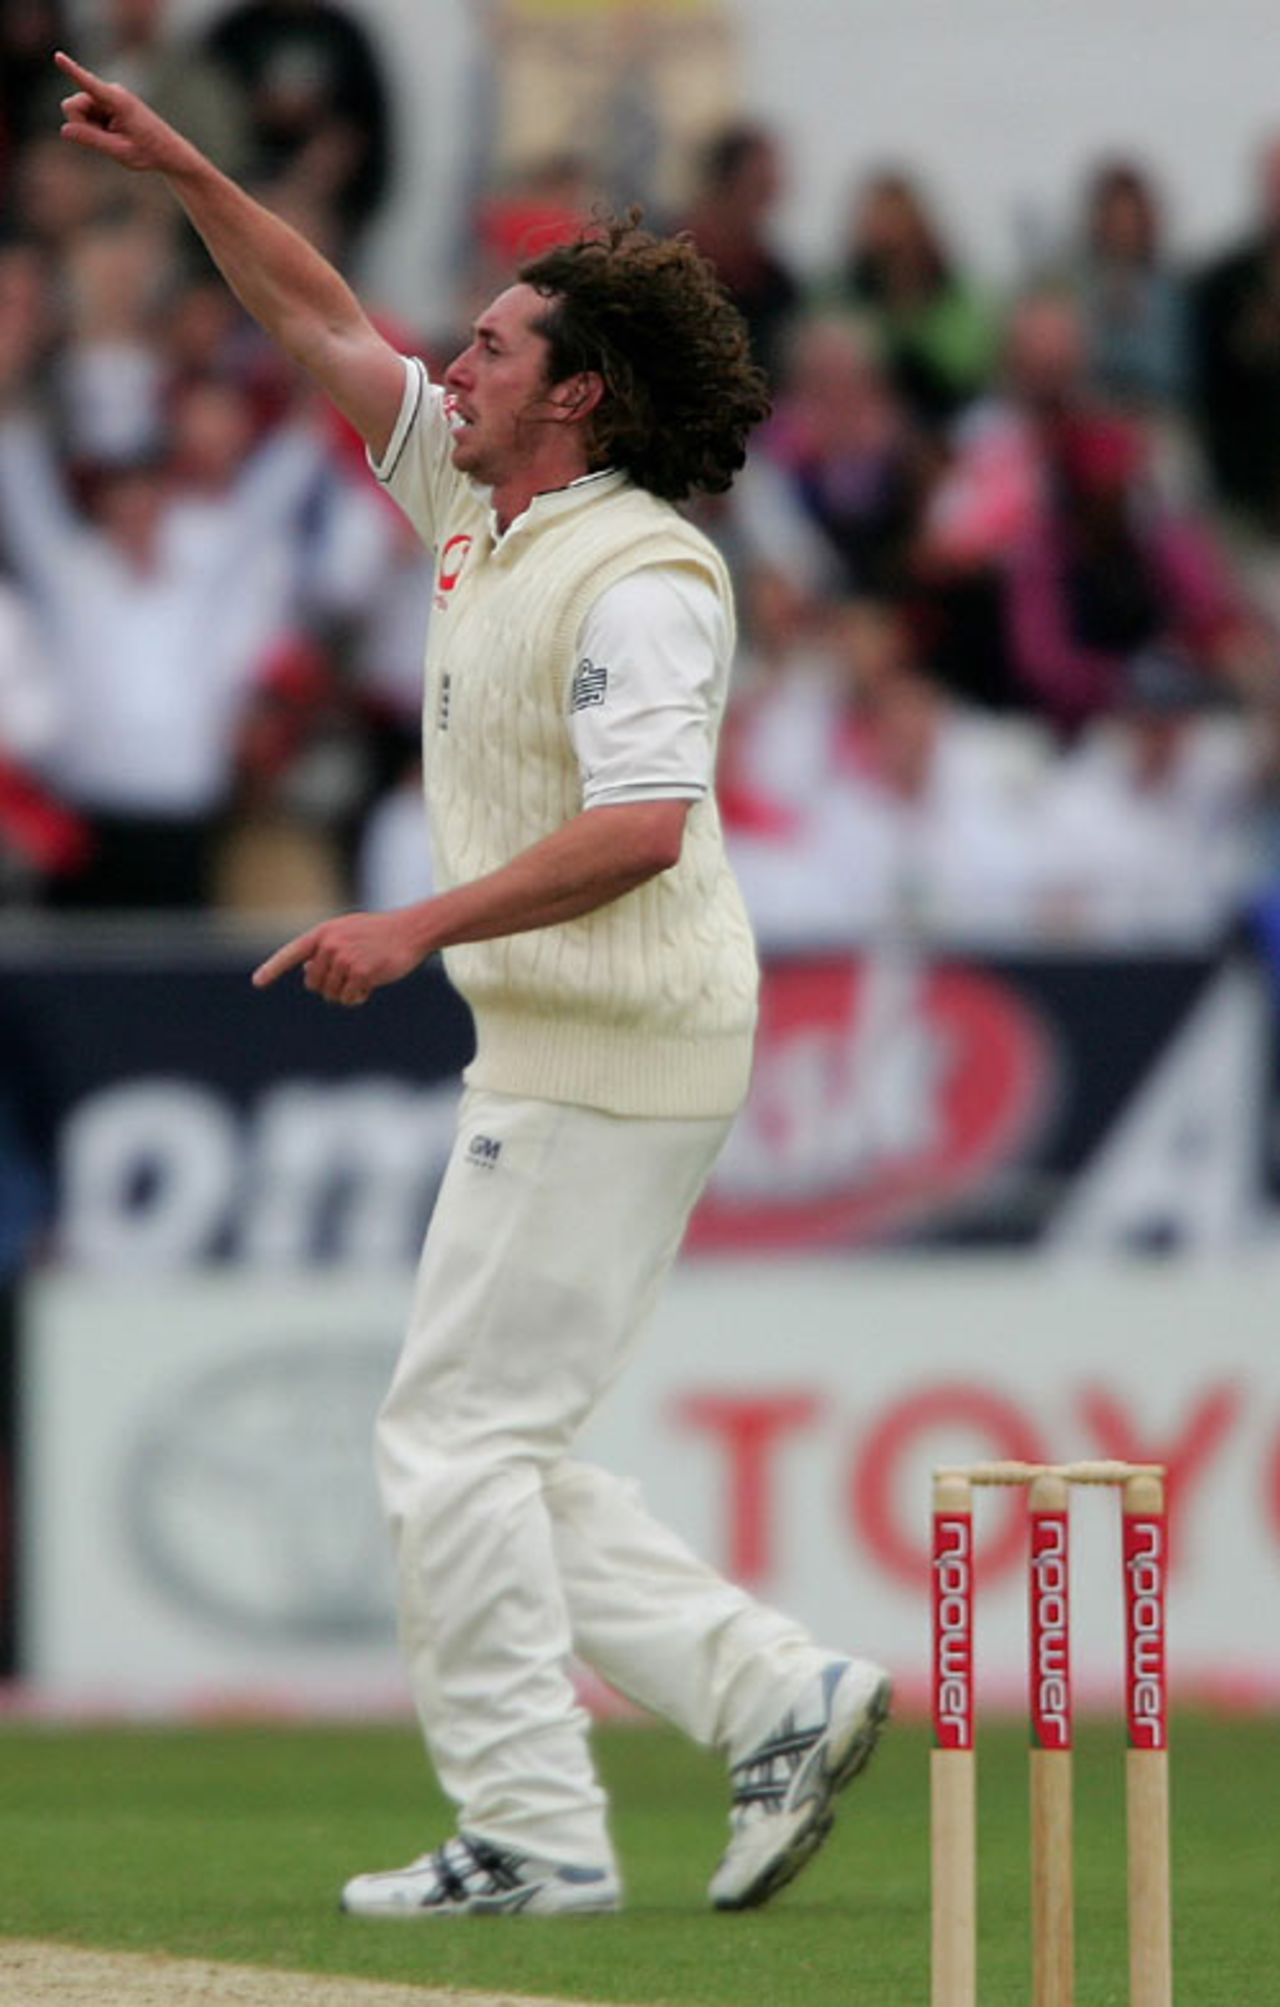 Ryan Sidebottom points to the crowd in delight after picking up another wicket, England v West Indies, 2nd Test, Headingley, May 26, 2007